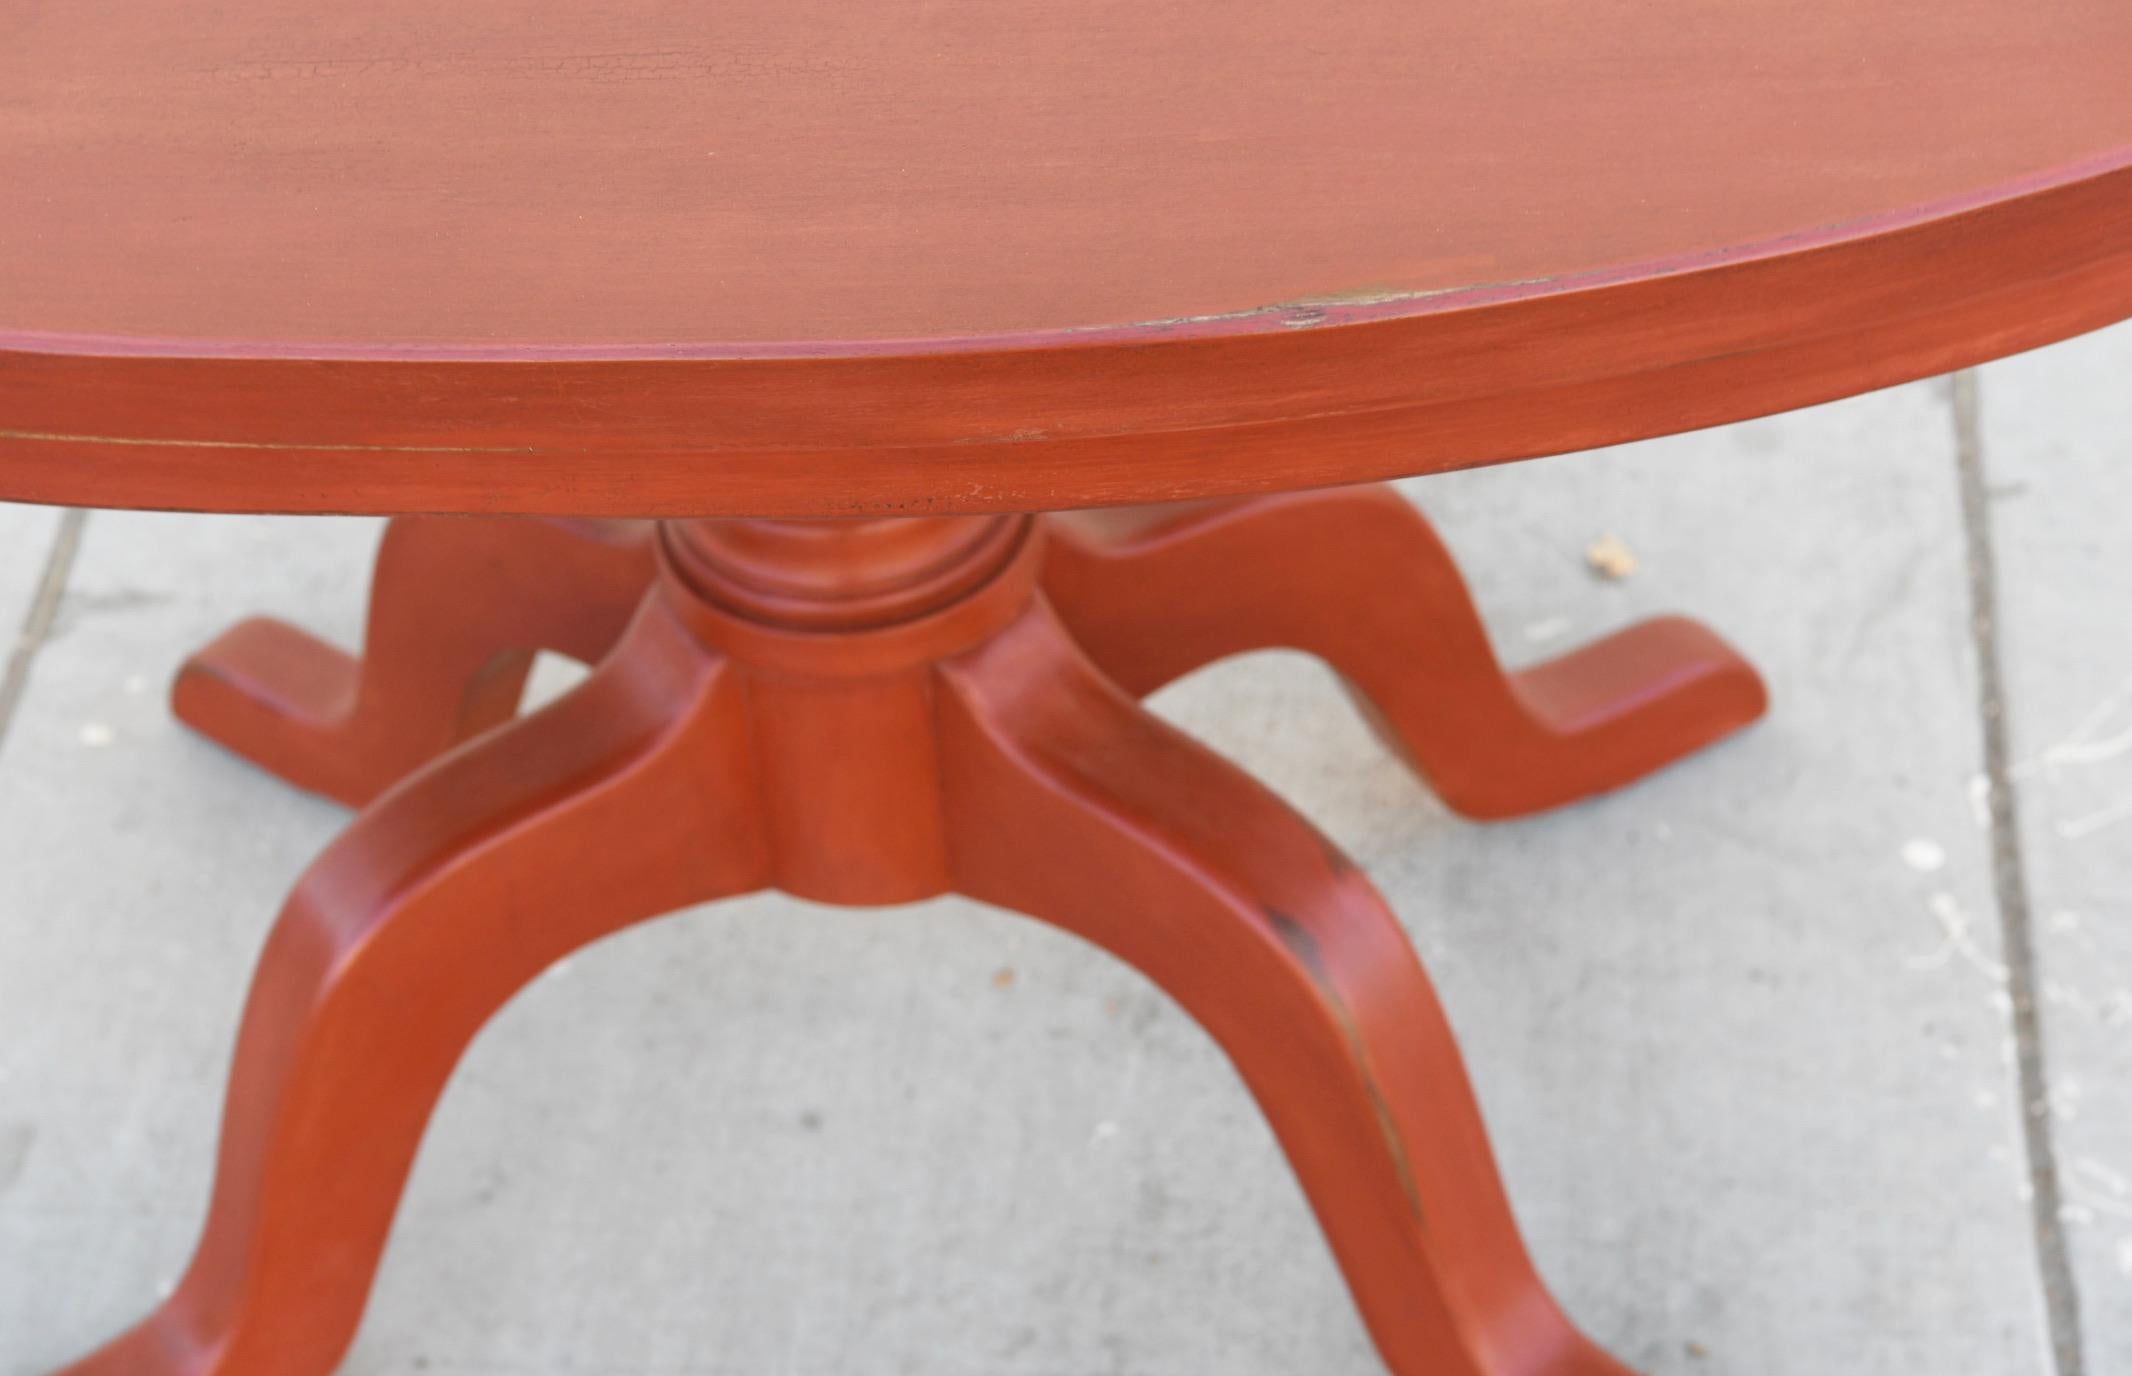 North American Custom Orange Painted Pedestal Table, Made to Order by Petersen Antiques For Sale